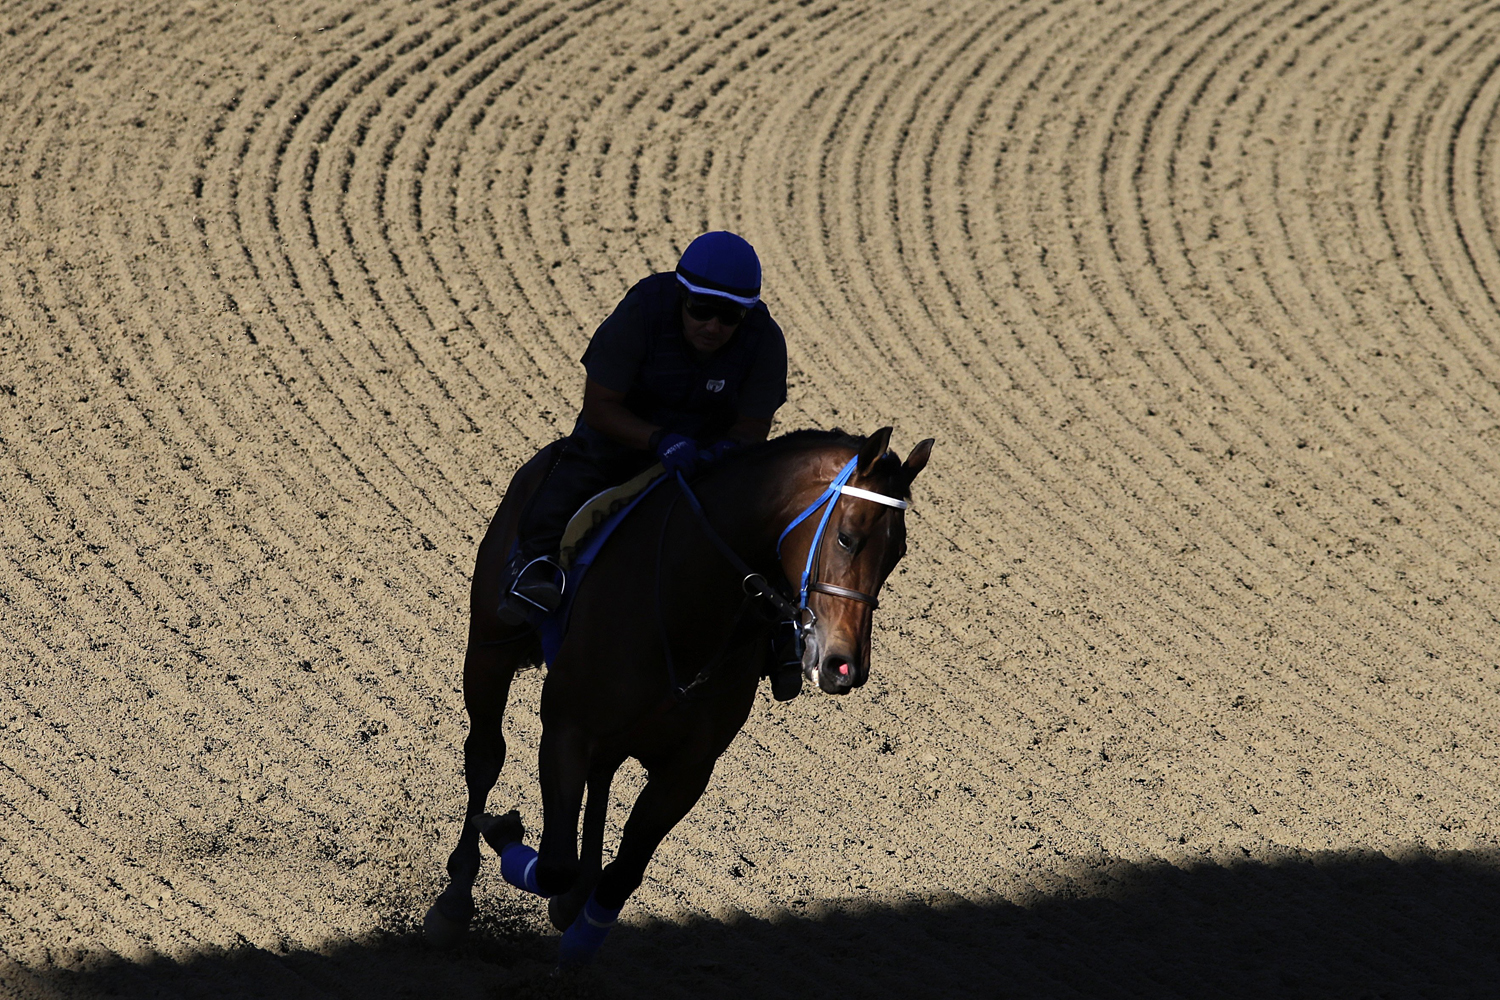 Oct. 30, 2013. A horse runs through a shadow on the track at Santa Anita Park in Arcadia, Calif, as horses workout in preparation for this weekend's Breeders' Cup horse races.